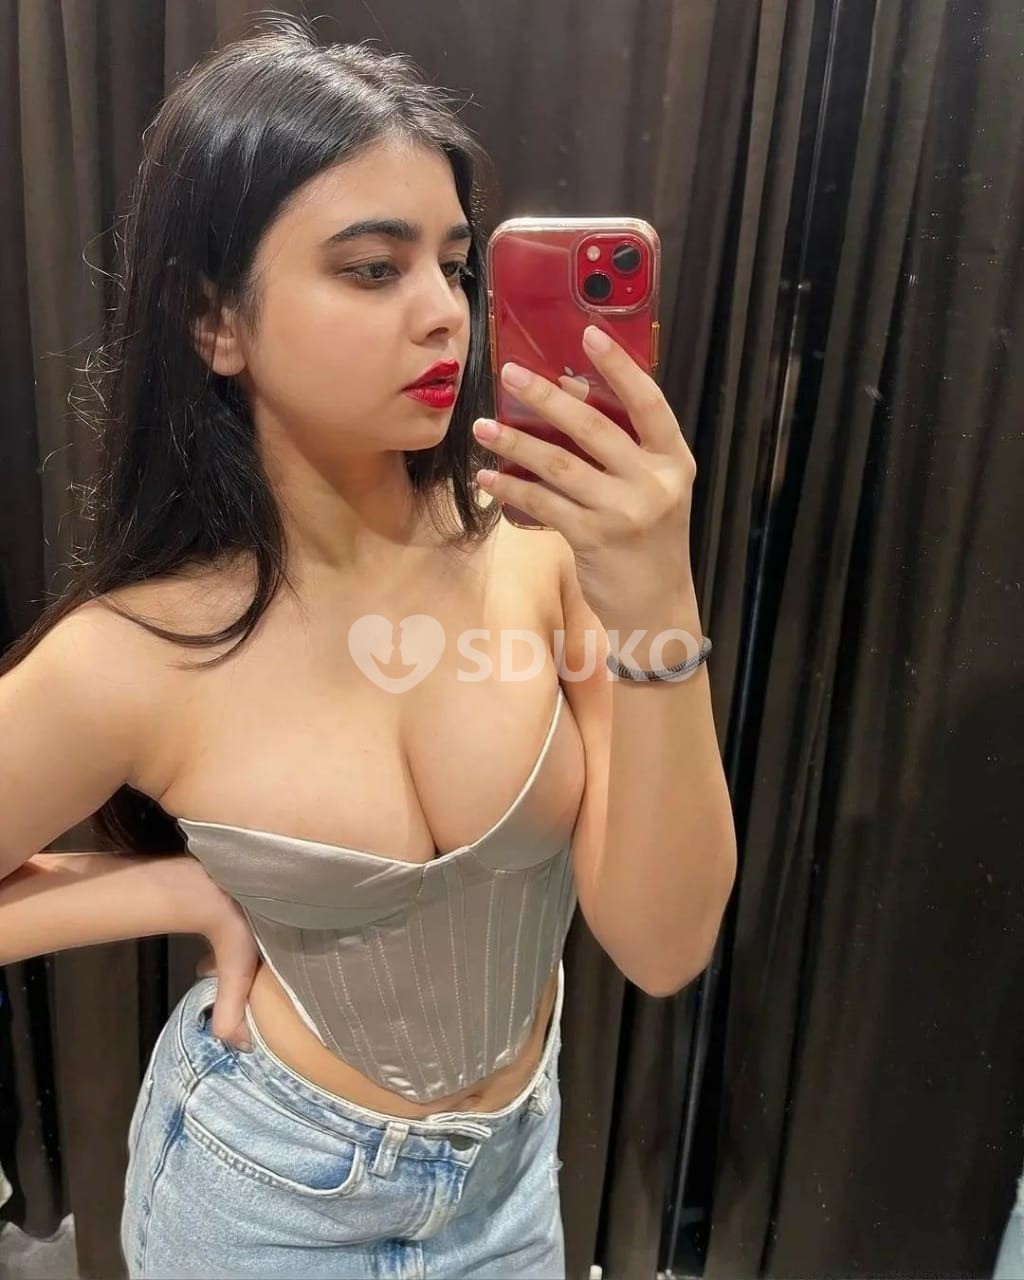 PUNE ALL AREA VIP TODAY LOW 🔅 🤩.PRICE ESCORT 🥰SERVICE 100% SAFE AND SECURE ANYTIME CALL ME 24 X 7 SERVICE AVAIL